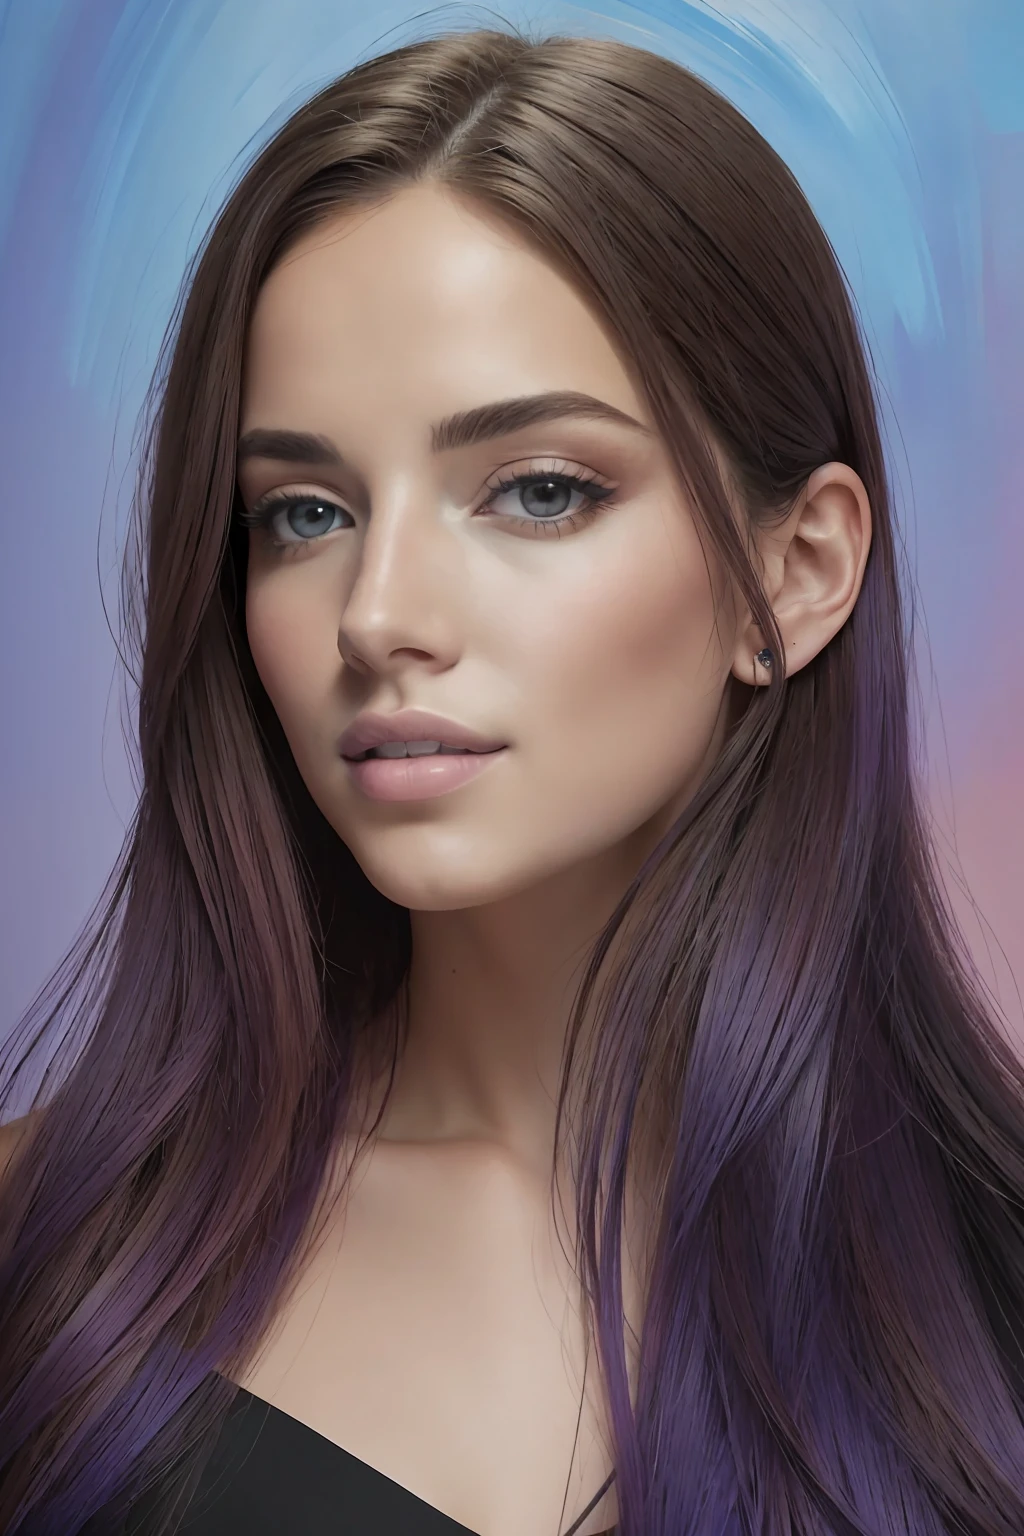 Beautiful and colorful girl: A 28-year-old Giru, messy hair, painting oil painting, perfect pretty face with smooth skin perfect face, green-blue colors, Additions of light purple and violet, light red additions, intricate details, Welcome screen, 8 k resolution, Masterpiece, Beautiful face, digital painting artstation very soft black ink flow: 8k resolution Photorealistic masterpiece: Intricately detailed fluid gouache painting:  by Jean Baptiste Mongue: calligraphy: acrylic: watercolor art, profesional photography, natural  lighting, volumetric lighting maximalist photoillustration: for Martin Bobzert:, Complex, elegant, expansive, genial, wavy hair, Vibrant, Better quality details, realist, Hi-Def, High quality texture, epic lighting, cinematic film still, 8k, soft illuminaotion, anime style, master playing card border, random colorful art, painting oil painting, blue yellow colors,  light purple and violet additions, light red additions, intricate details, Welcome screen, 8k resolution, Masterpiece, digital painting by artstation Very smooth Black ink flow: 8k resolution Photorealistic masterpiece: Intricately detailed fluid gouache painting: by Jean Baptiste Mongue: calligraphy: acrylic: watercolor art, profesional photography, natural  lighting, volumetric lighting maximalist photoillustration: for Martin Bobzert:, Complex, elegant, expansive, genial, Vibrant